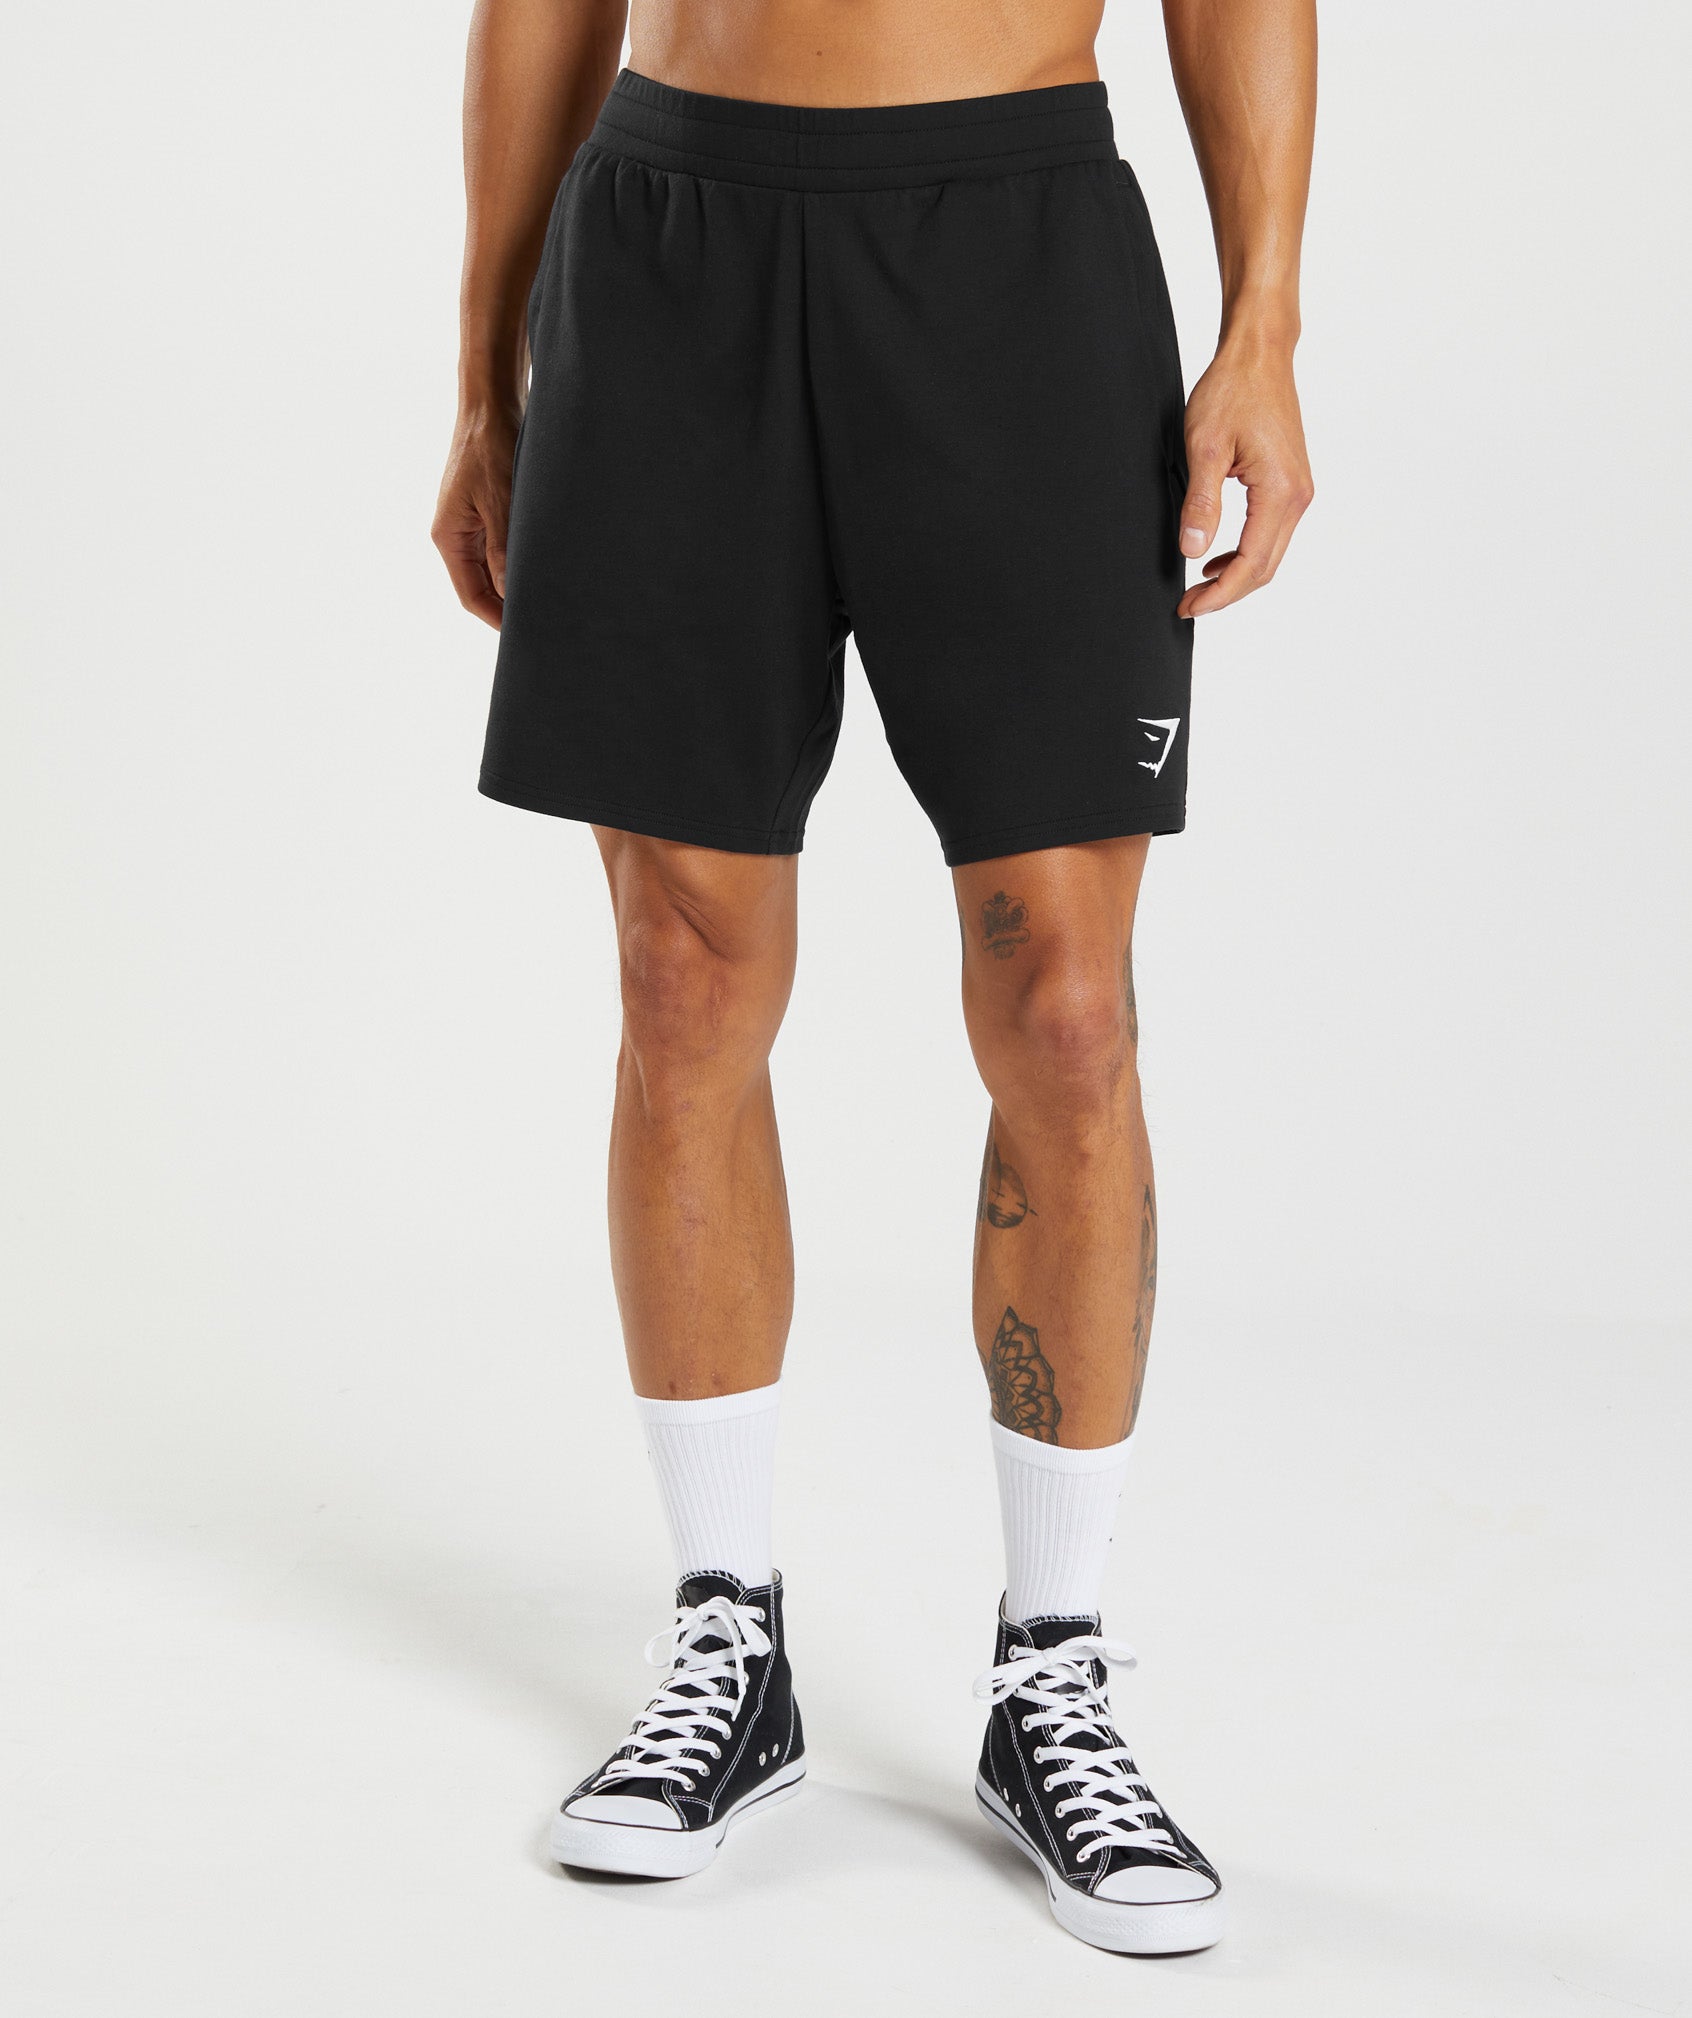 Critical 7" Shorts in Black - view 1